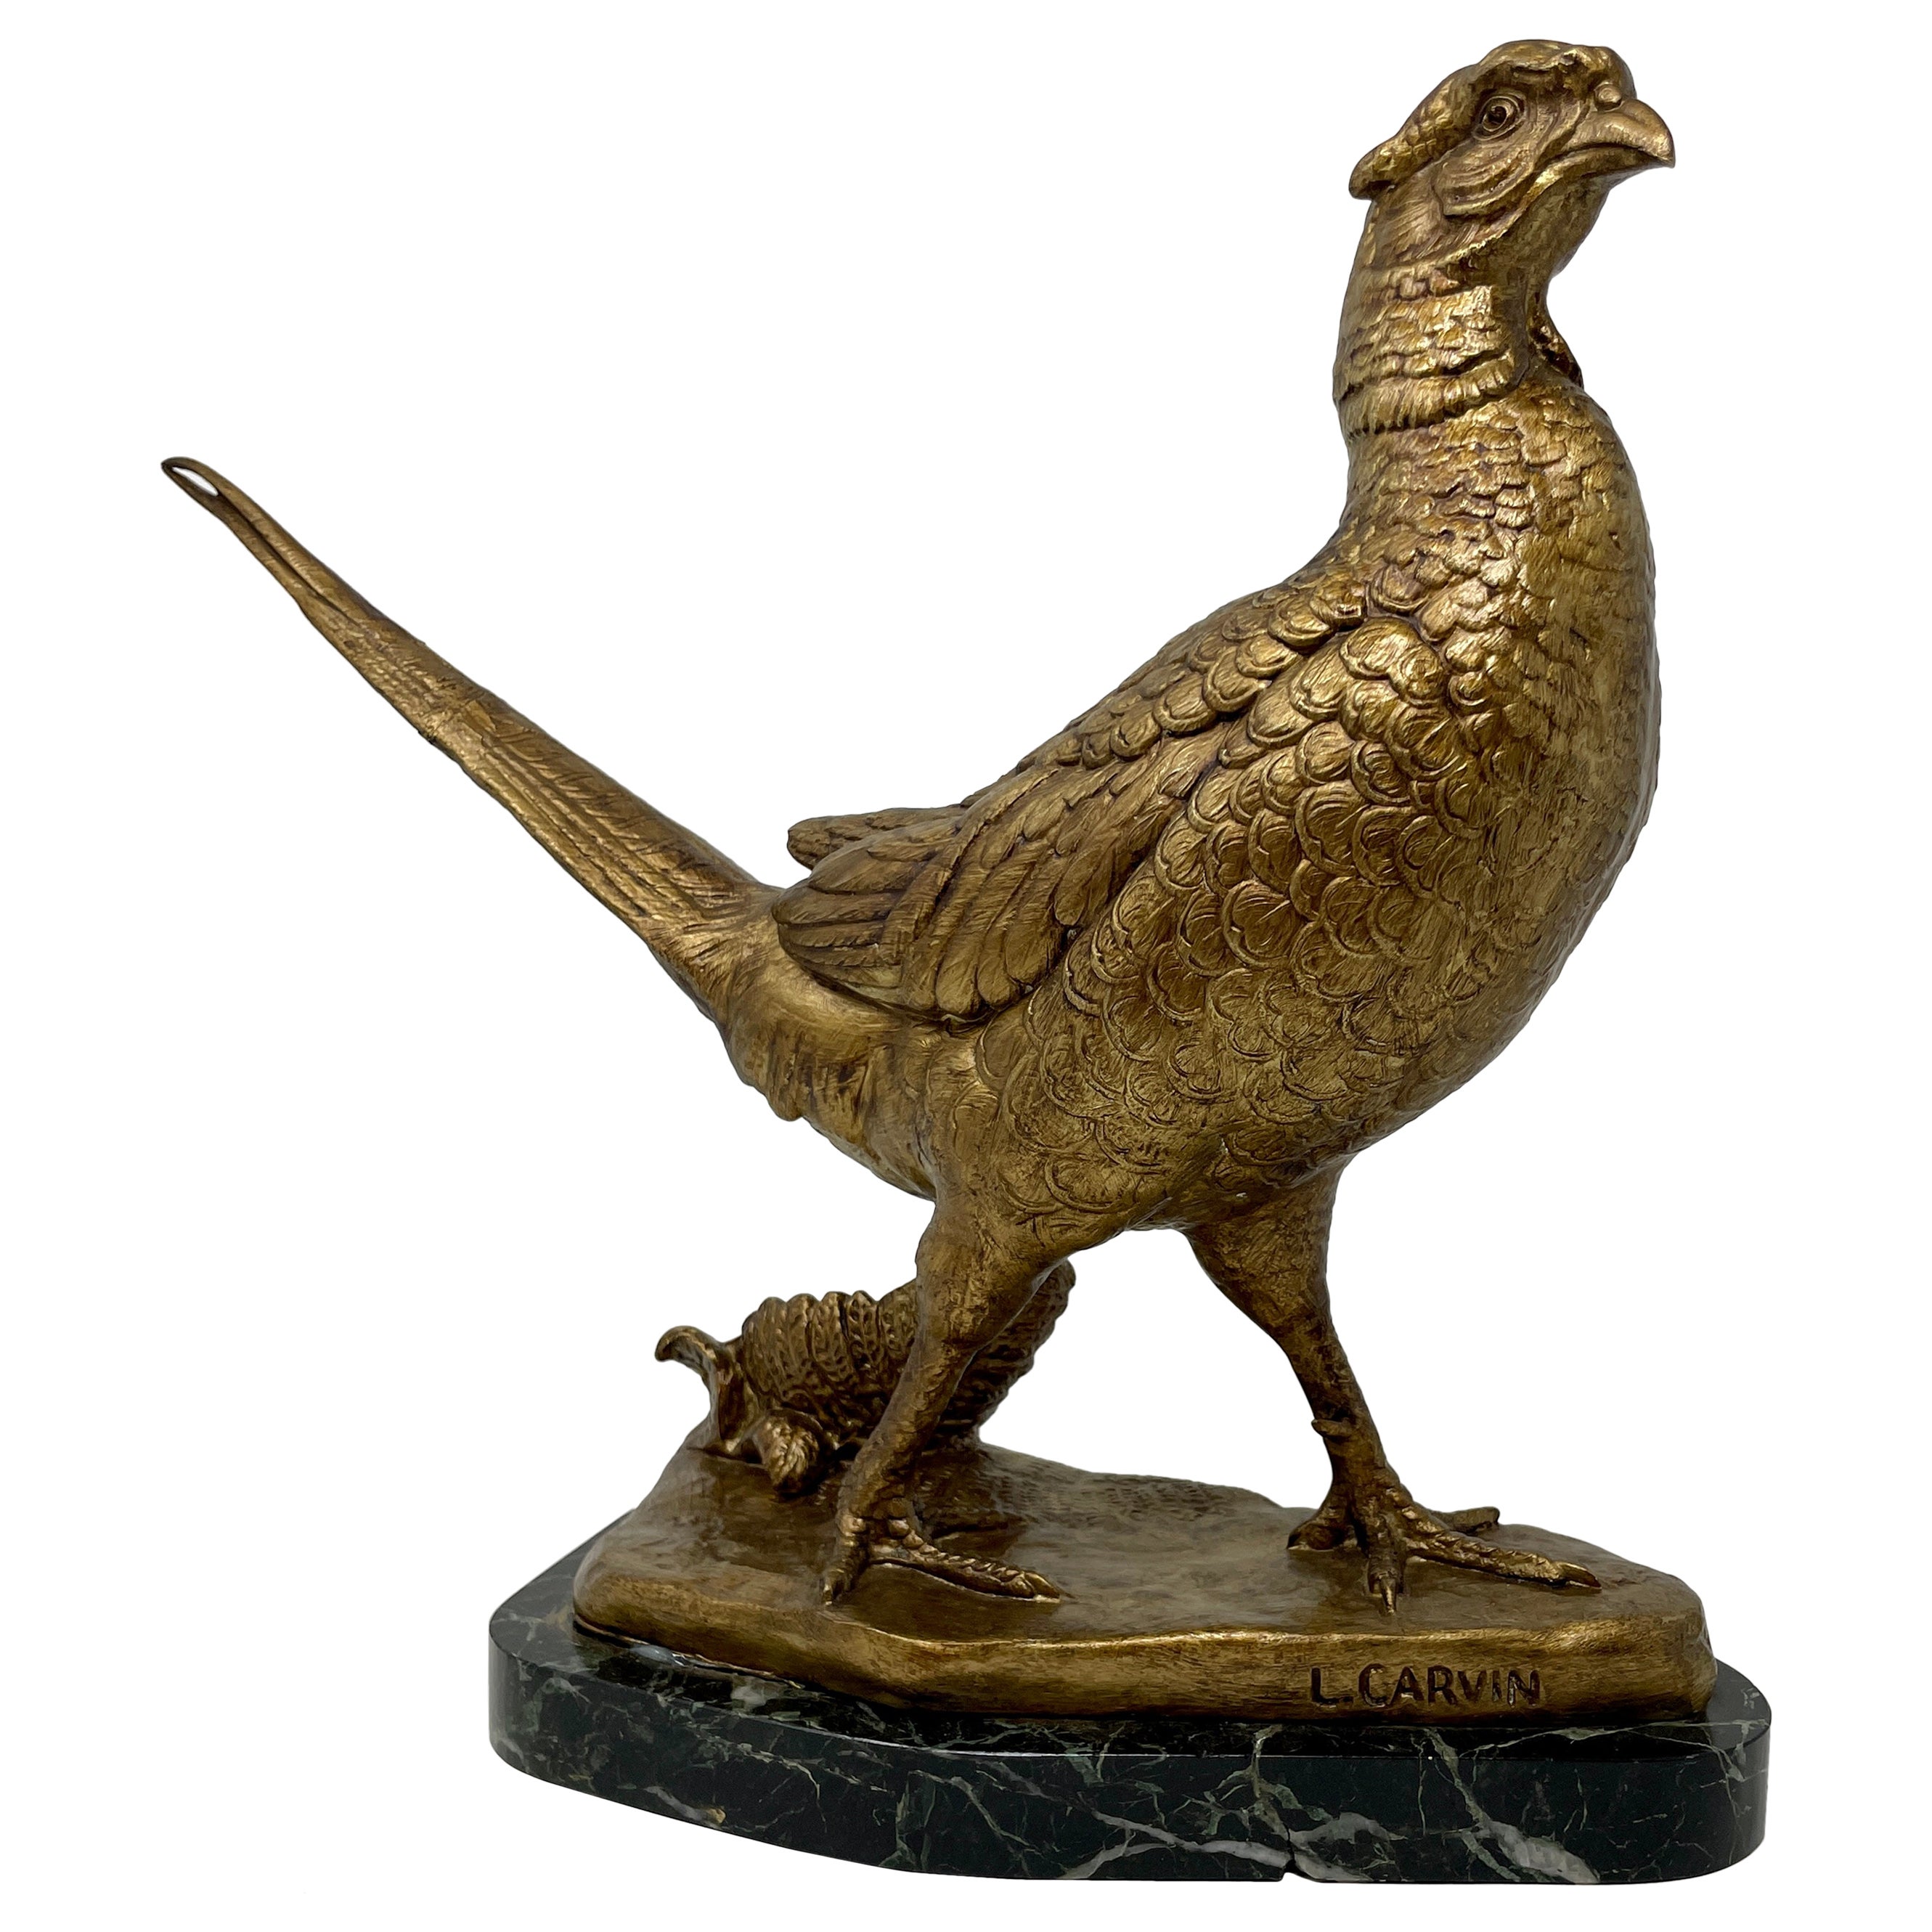 Antique French "L. Carvin" Gold Bronze Pheasant Sculpture on Marble, Circa 1890